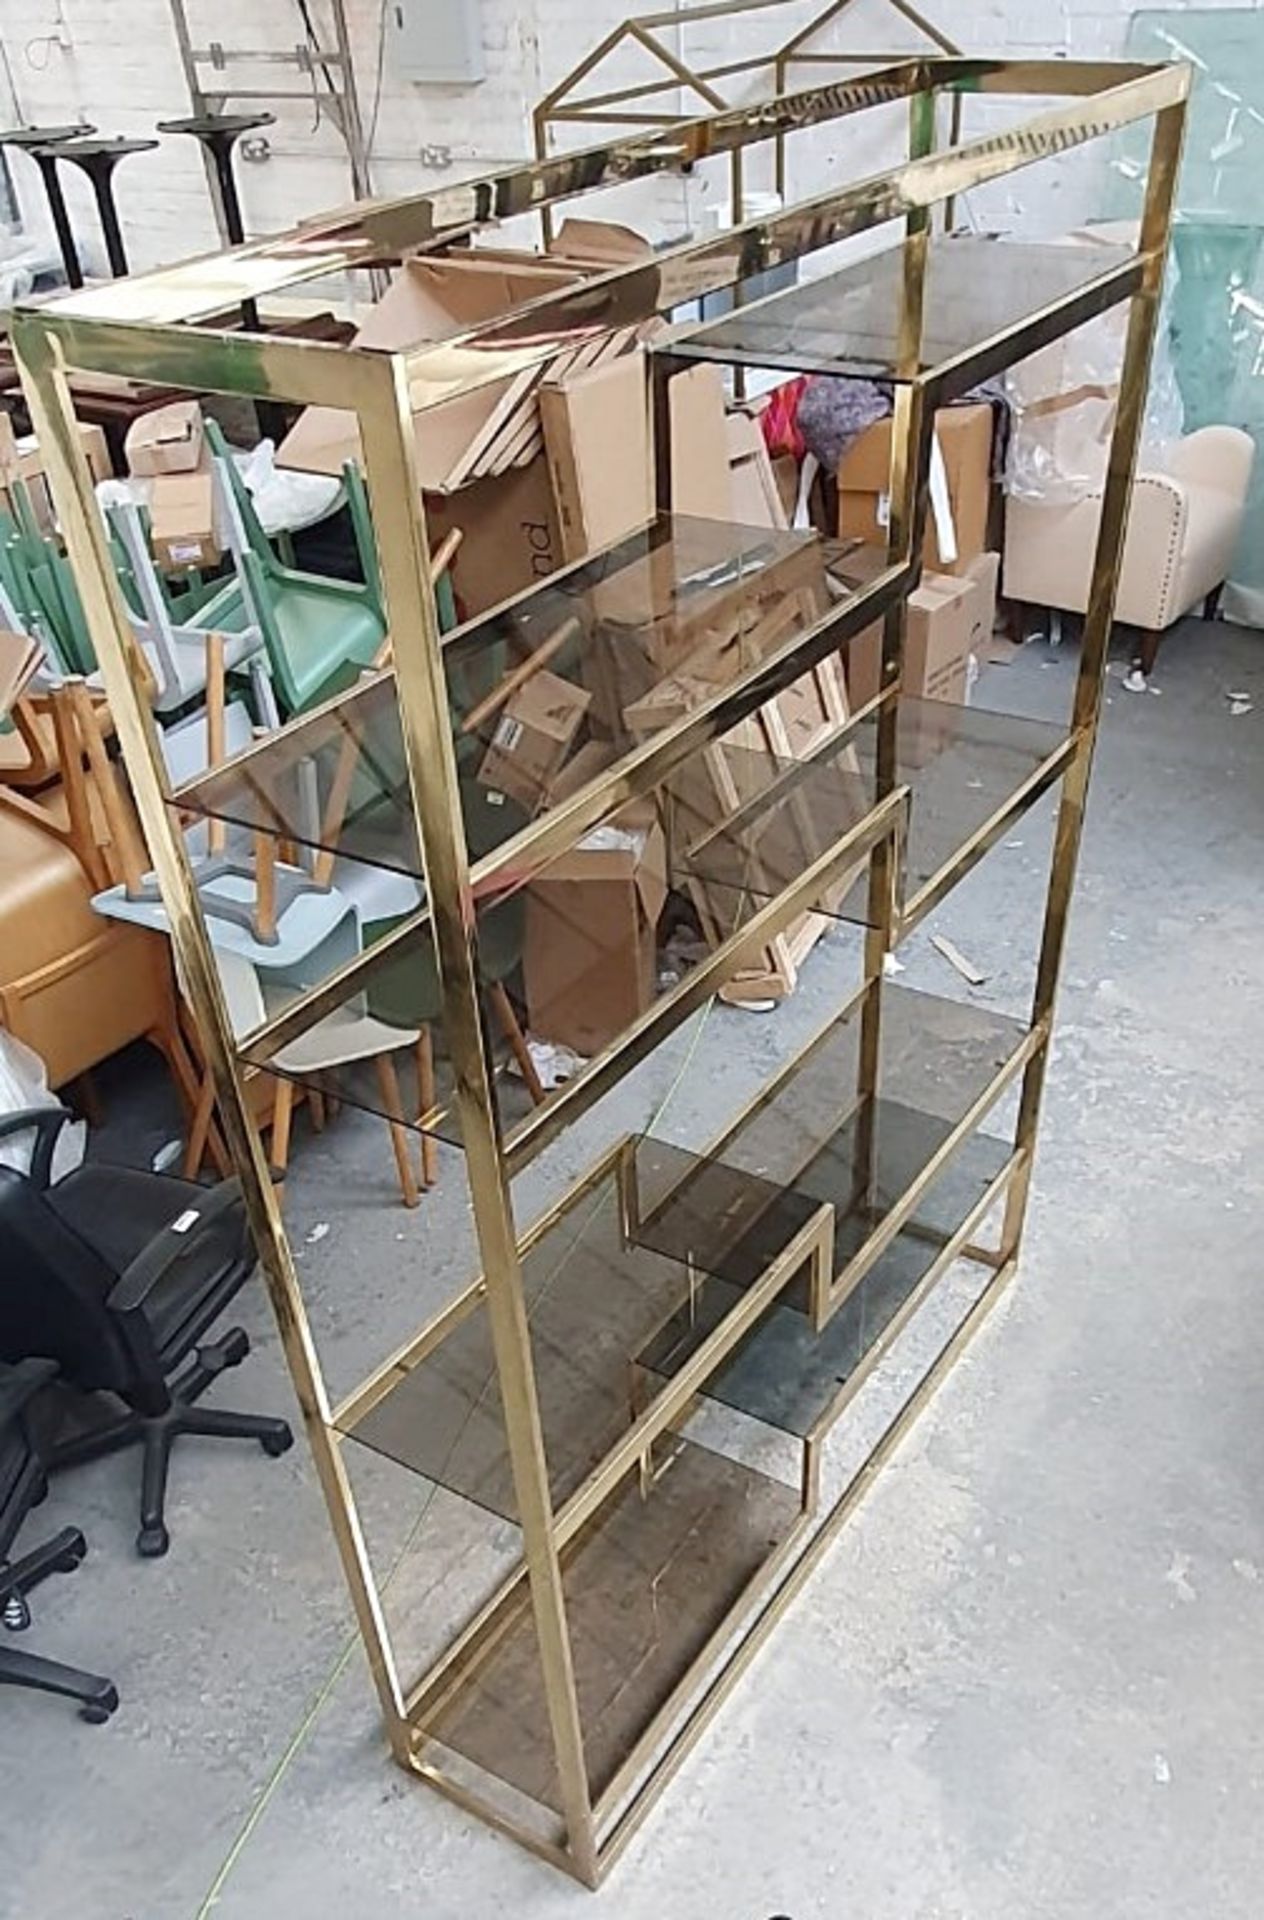 1 x Impressive Art Deco-Style 2.1-Metre Tall Storage Unit In Gold With  Tinted Glass Glass Shelves - Image 5 of 8